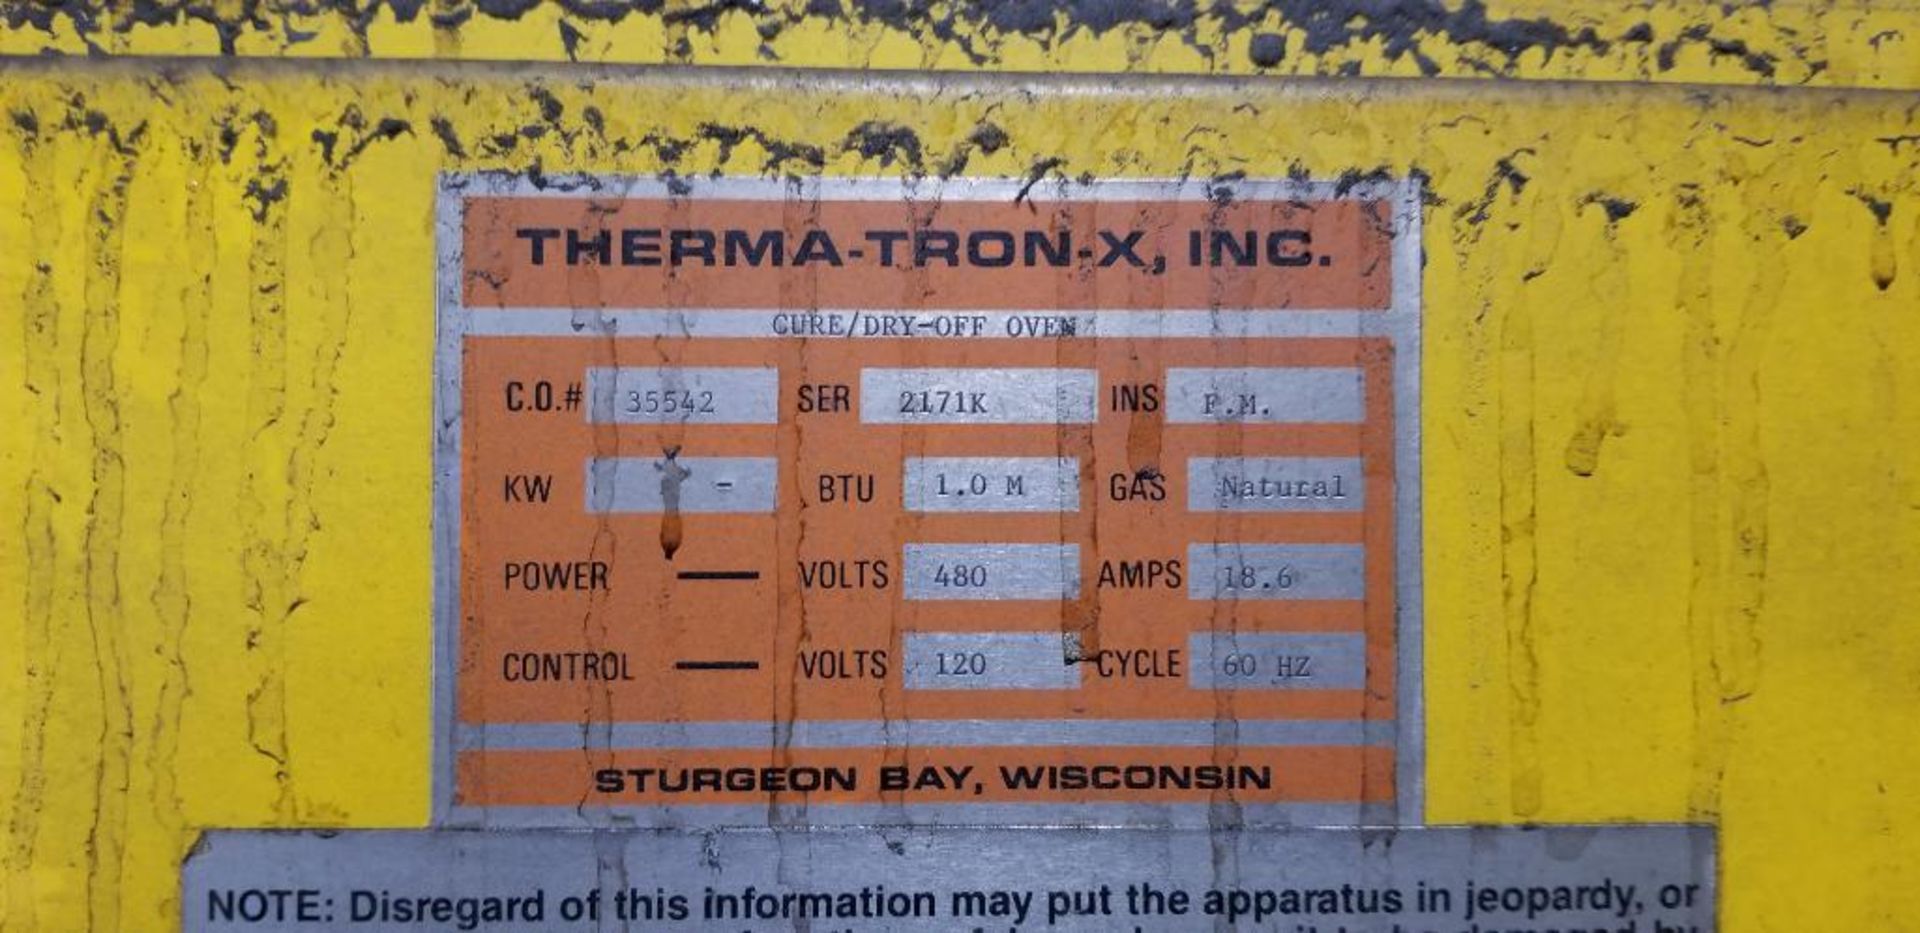 Therma-Tron-X Cure/Dry-Off Oven - Image 3 of 6